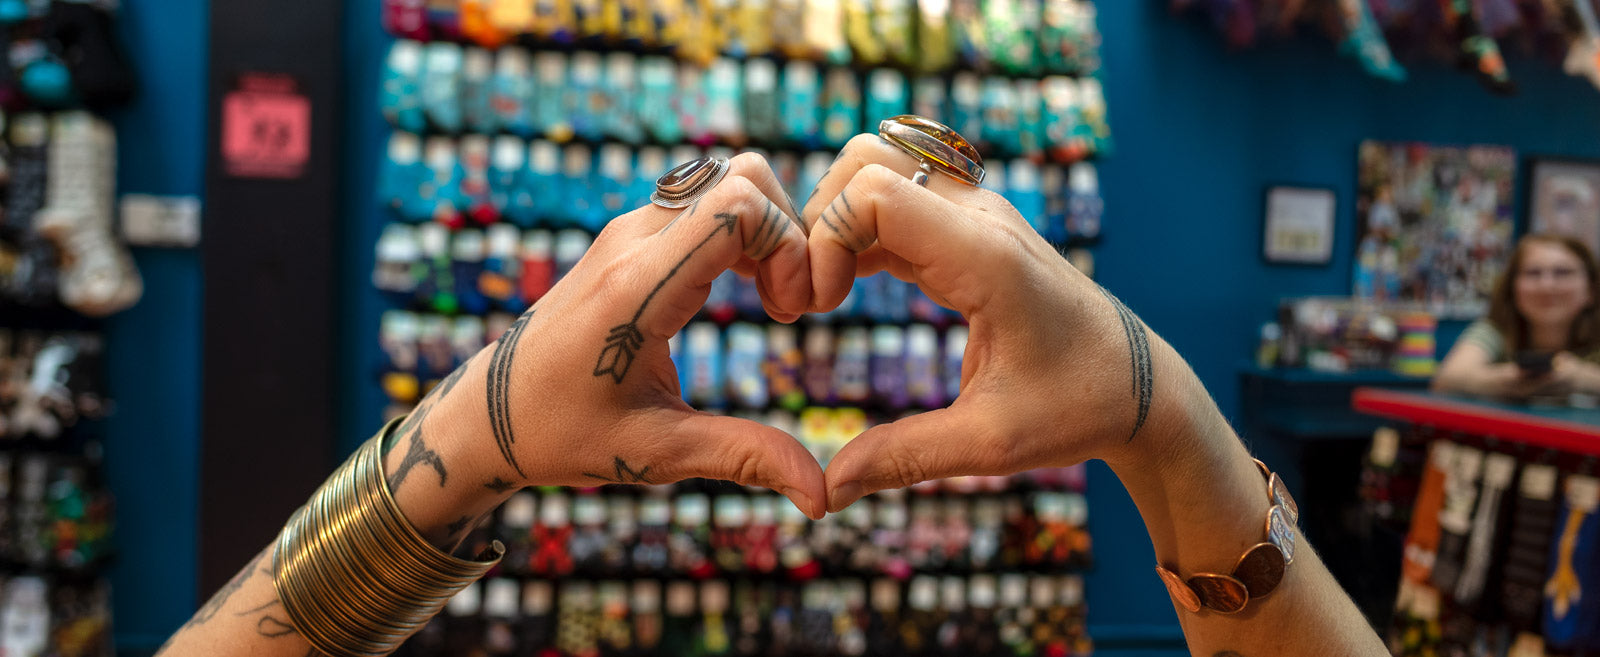 An employee makes a heart shape with her hands at Cute But Crazy Socks, a sock store in Bellingham, Washington.